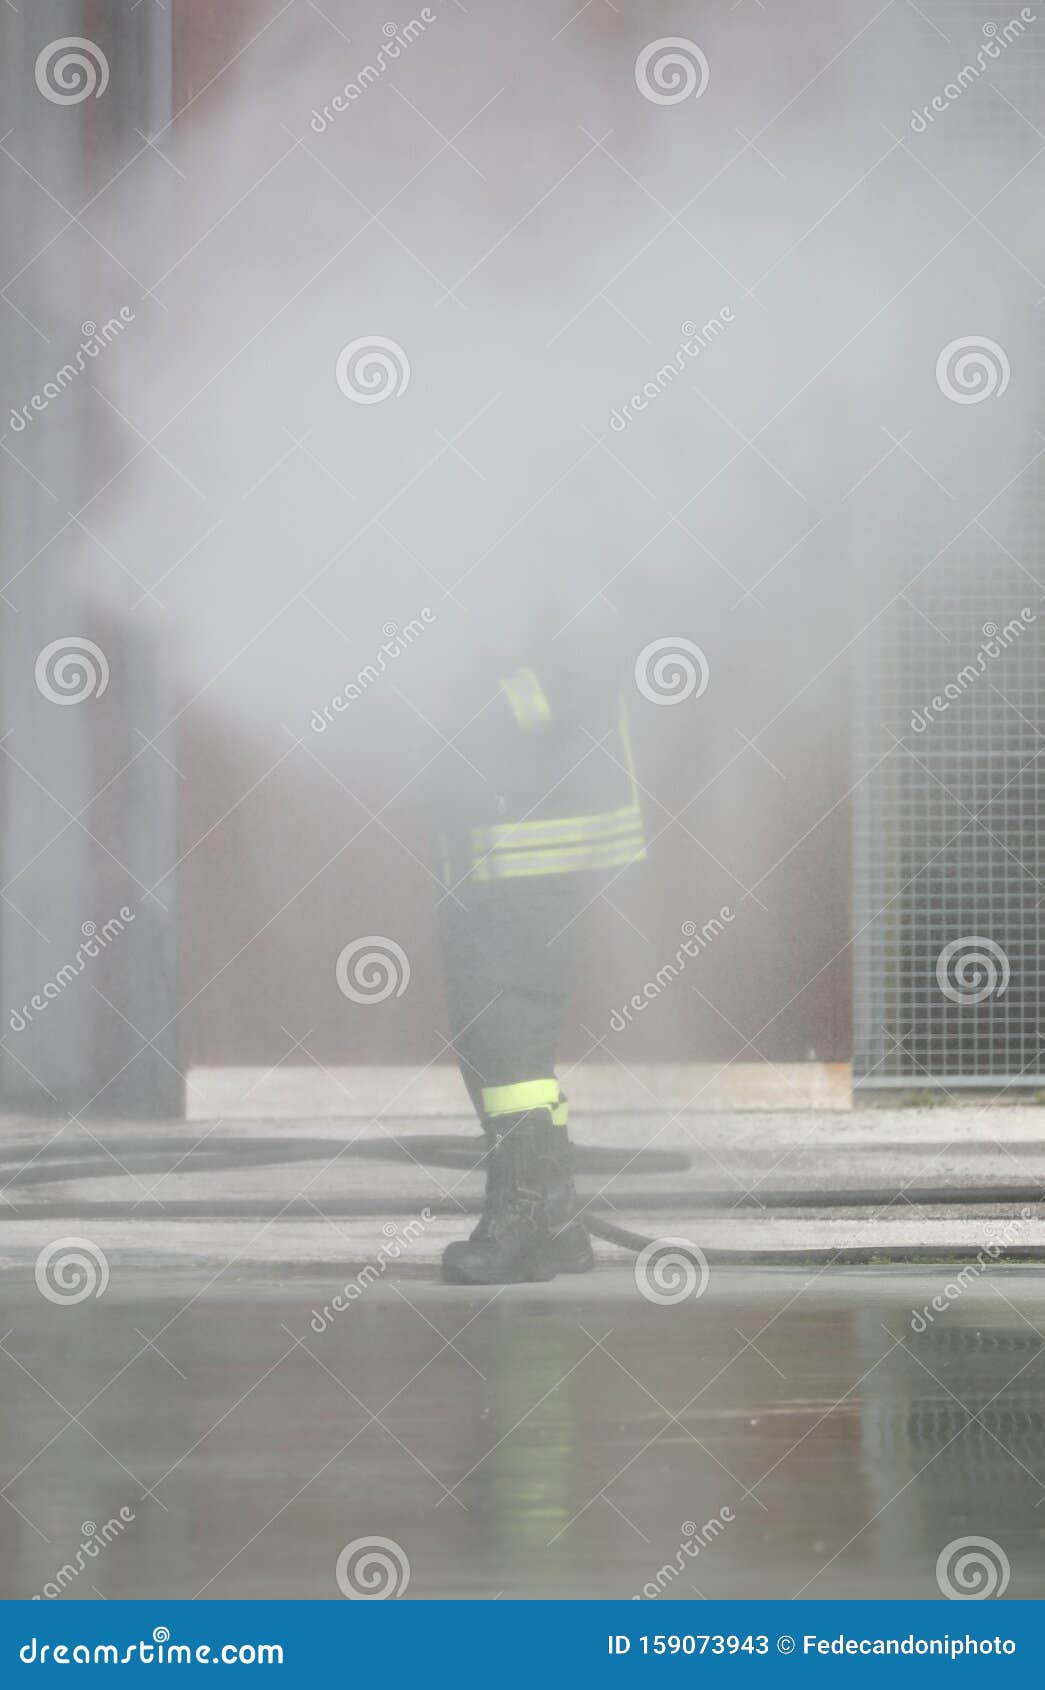 firefighter extinguishes the fire